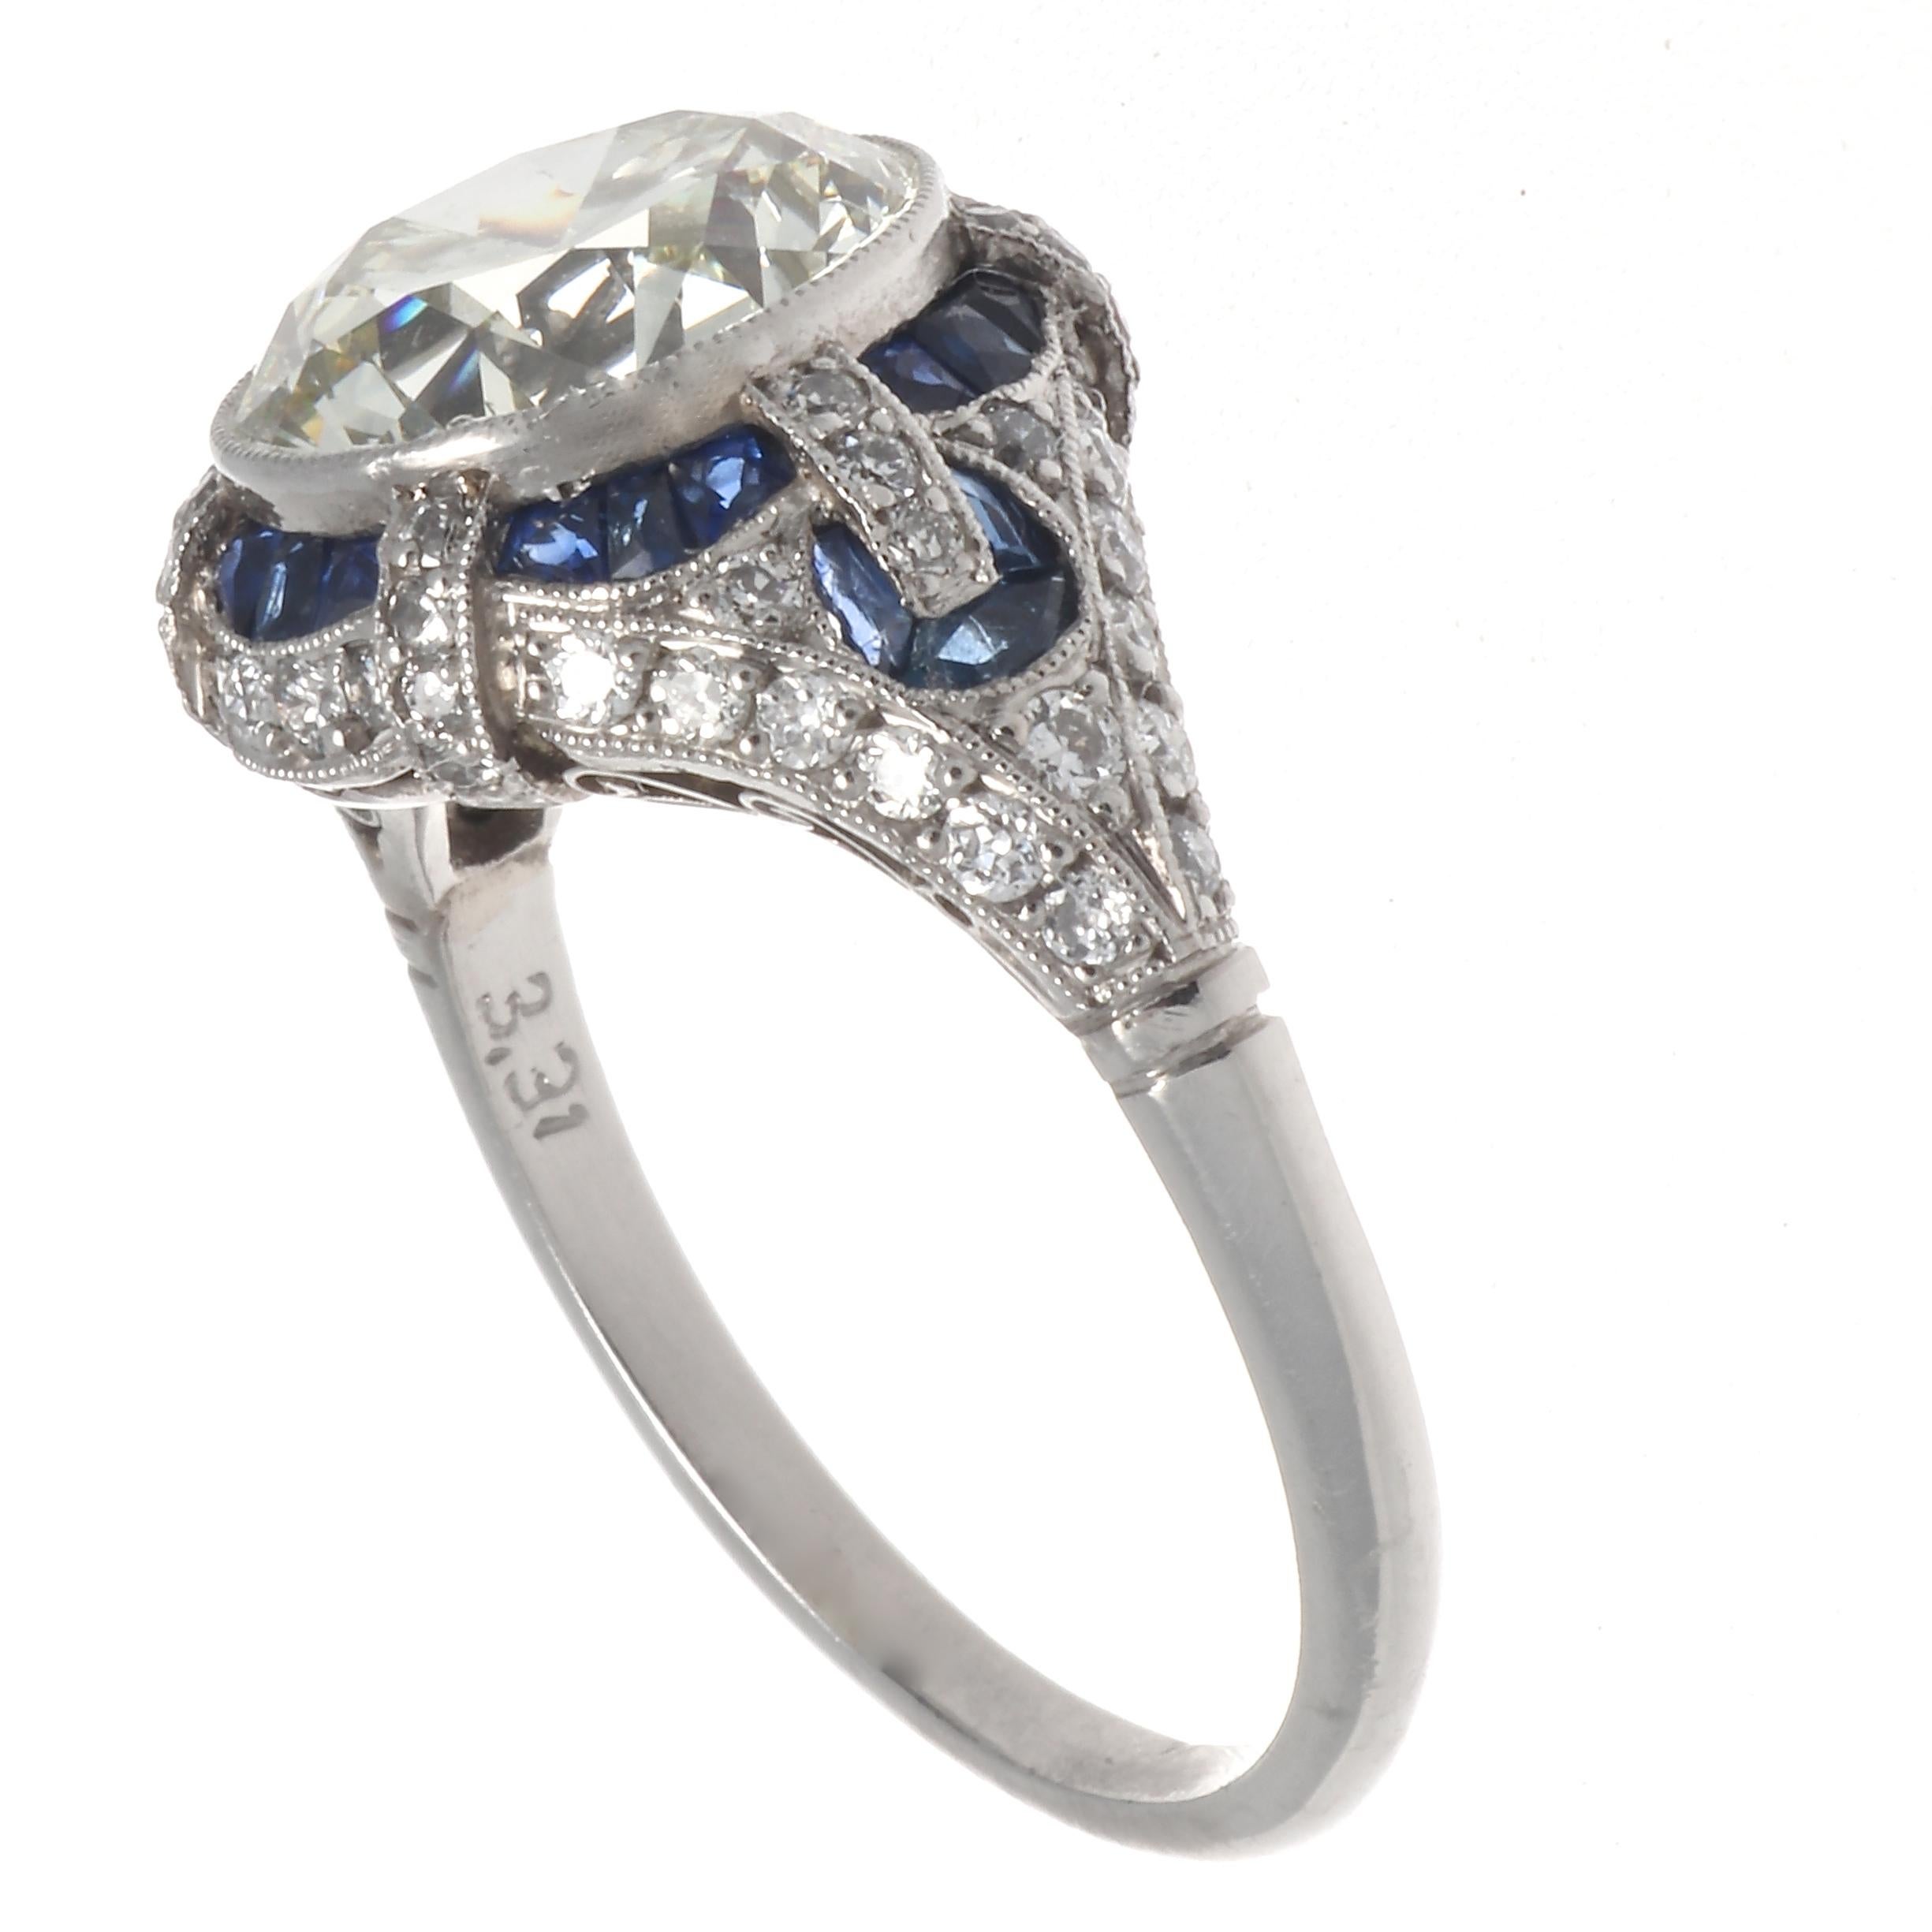 The engagement ring of all engagement rings, an Art Deco inspired diamond sapphire platinum engagement ring that is a total knockout. Featuring a 3.31 carat old European cut diamond, graded K-L color, VVS clarity. With 24 French cut sapphires that